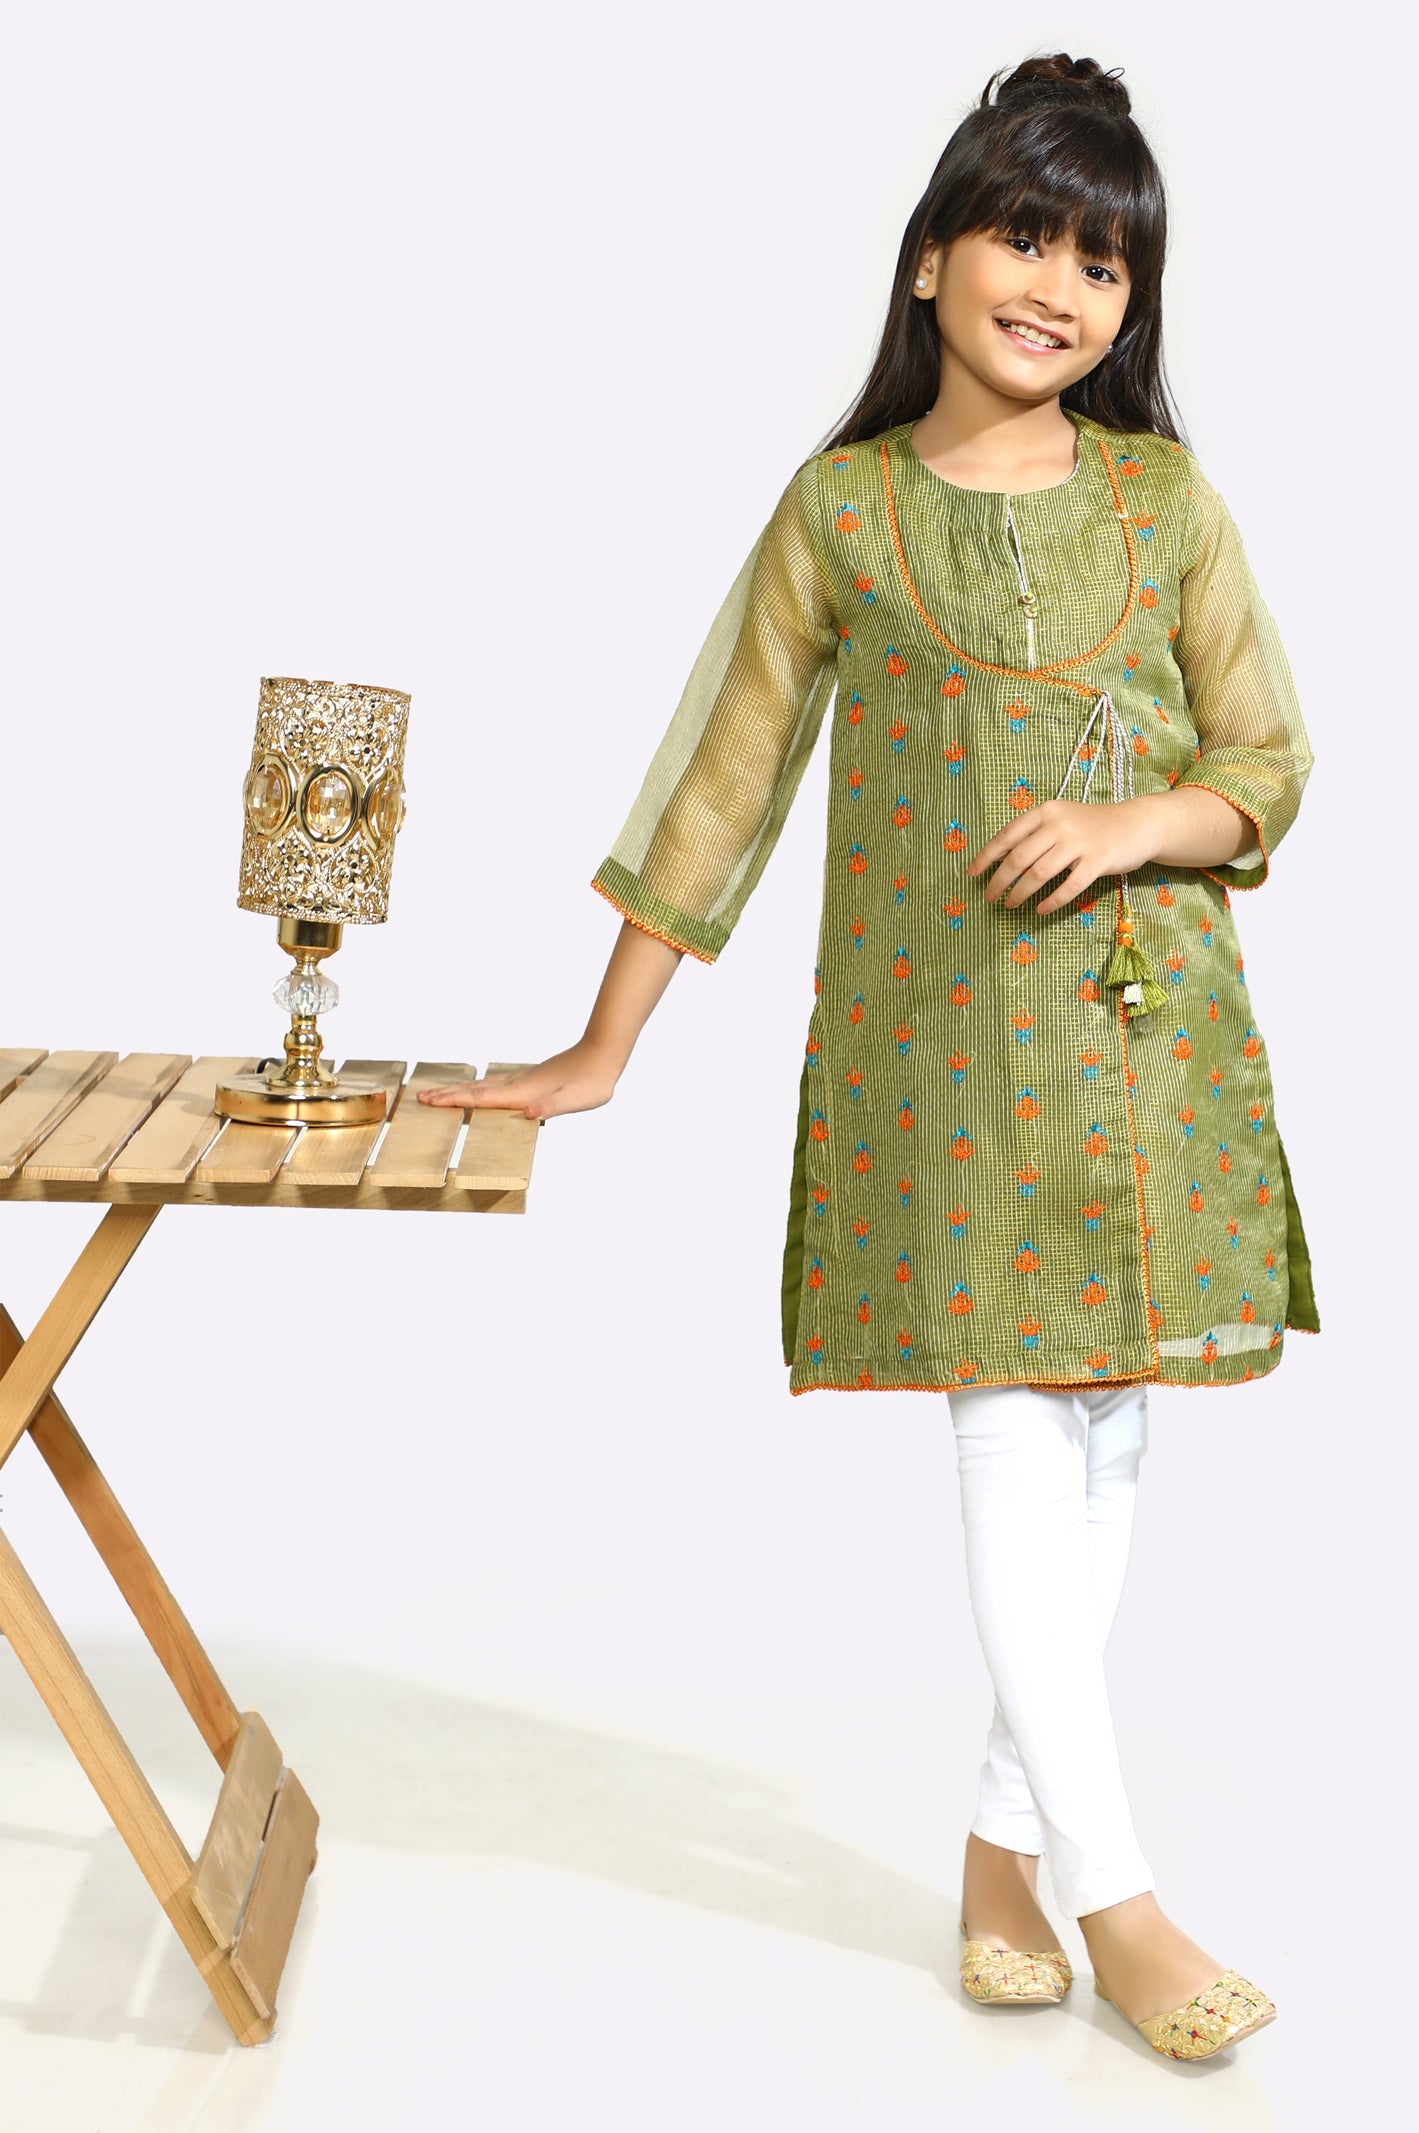 Green Girls Kurti From Diners